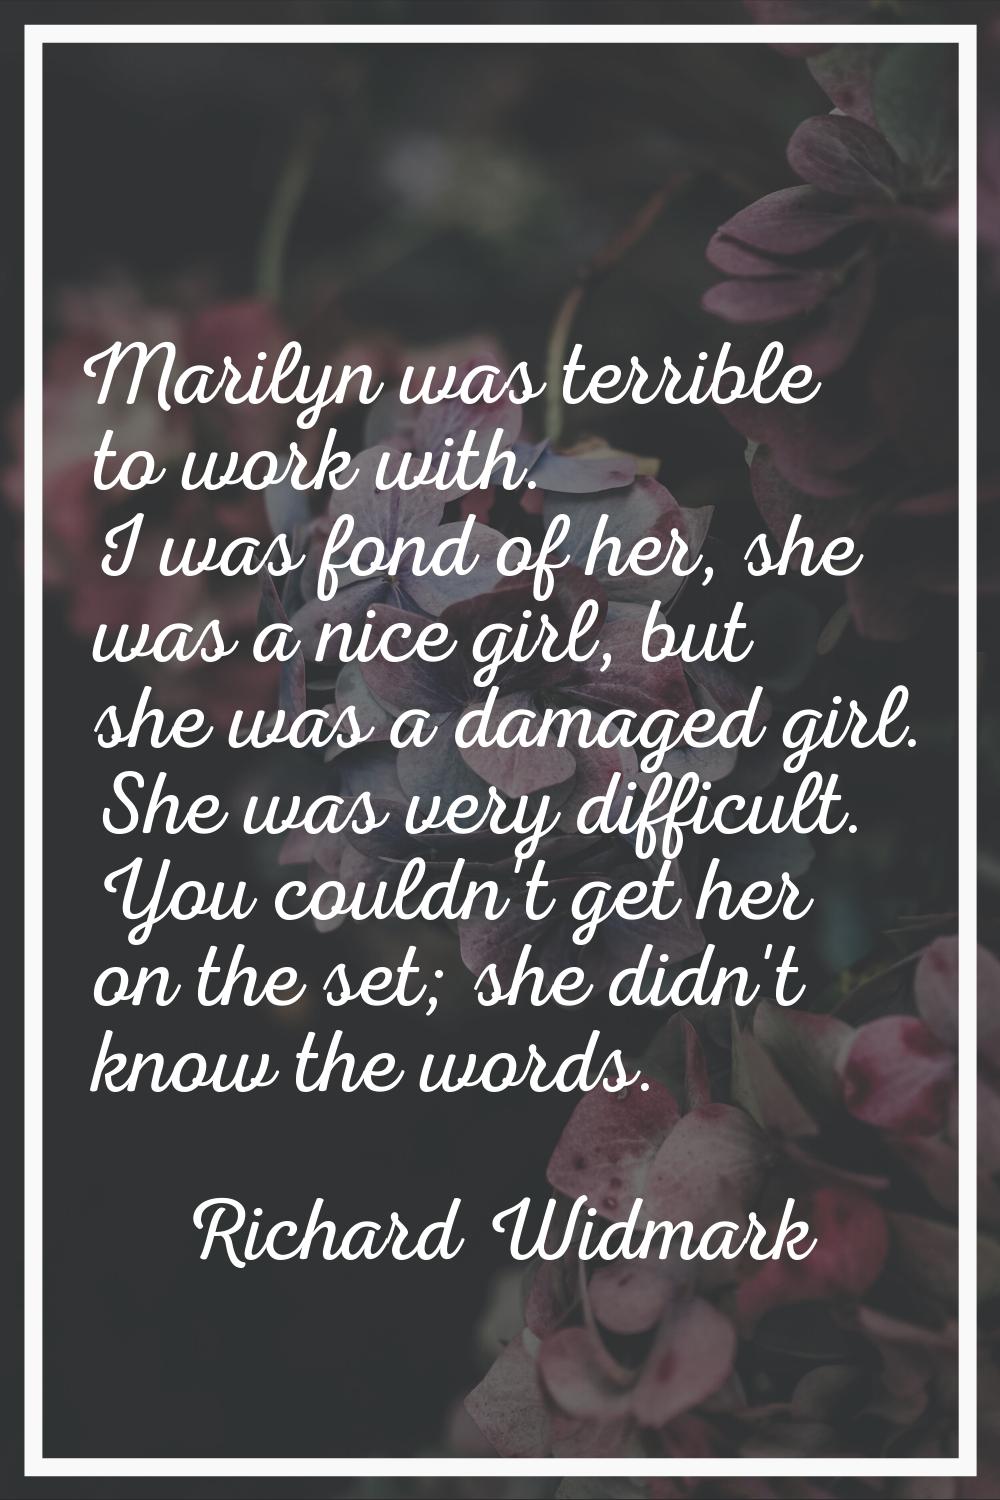 Marilyn was terrible to work with. I was fond of her, she was a nice girl, but she was a damaged gi